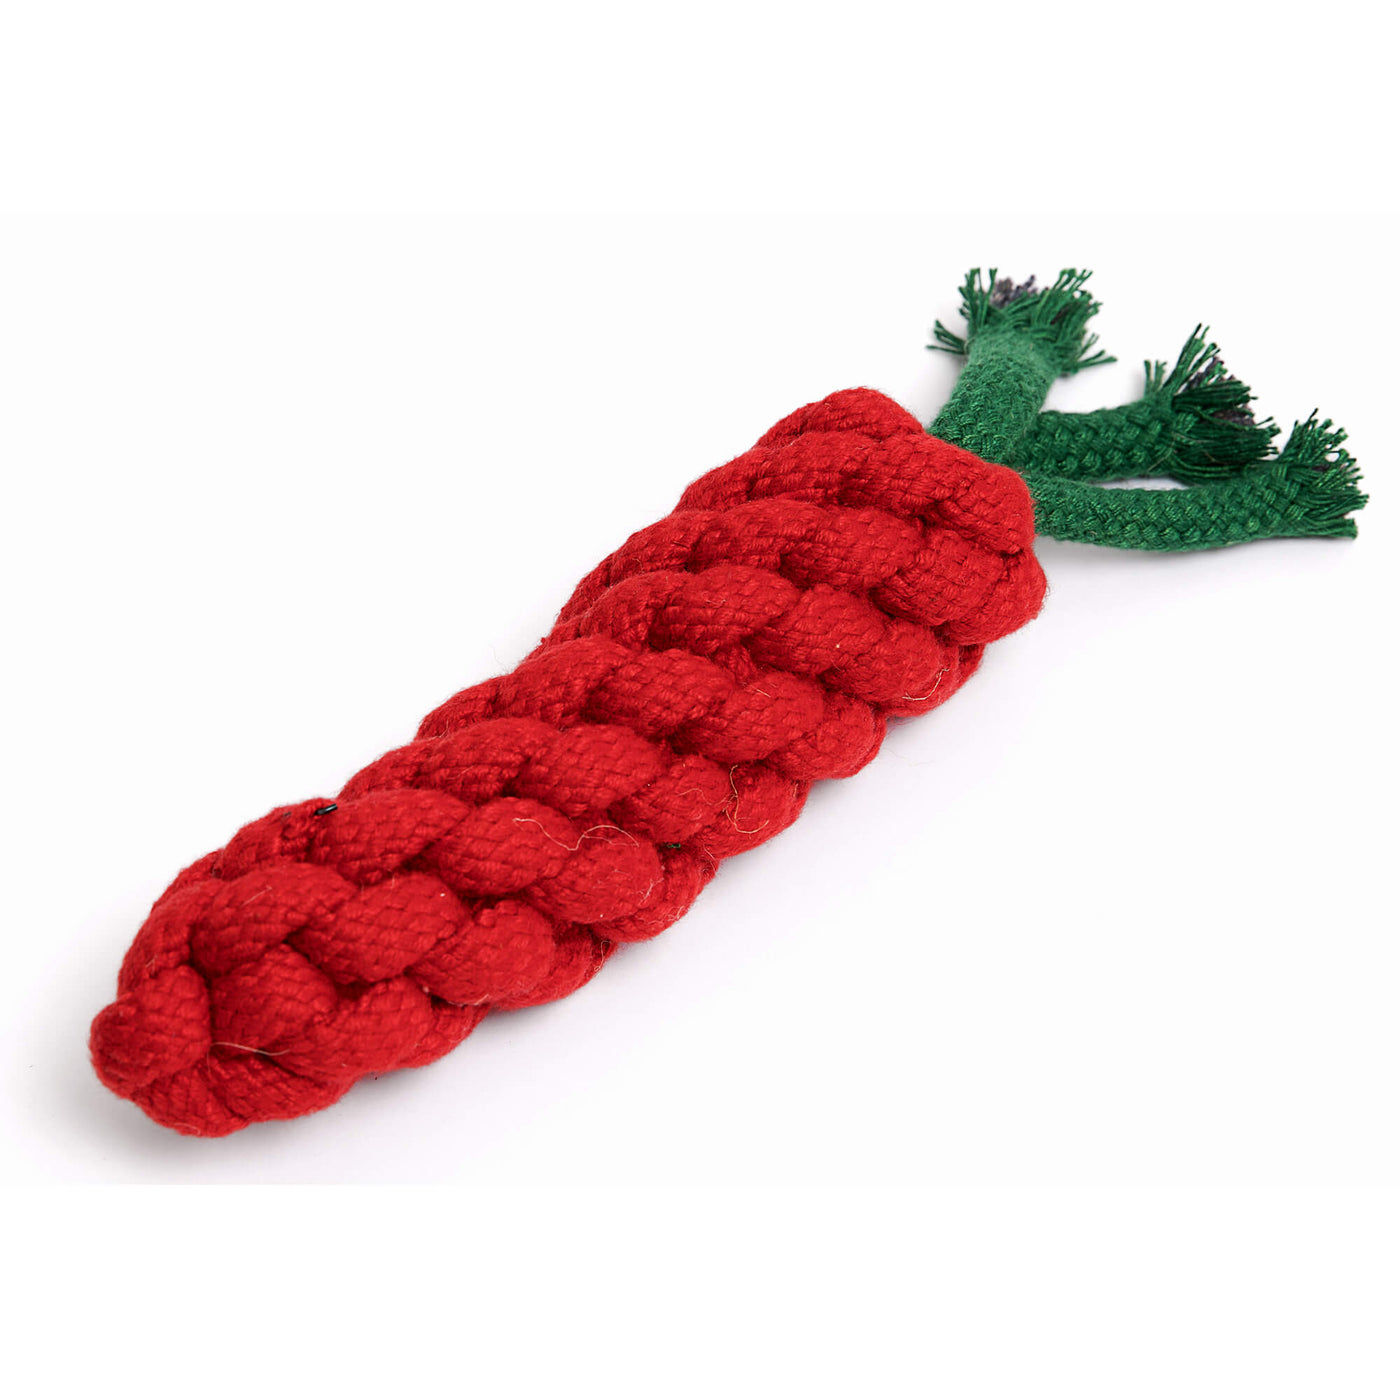 Only Natural Pet Eco-Friendly Regenerated Cotton Carrot Dog Toy